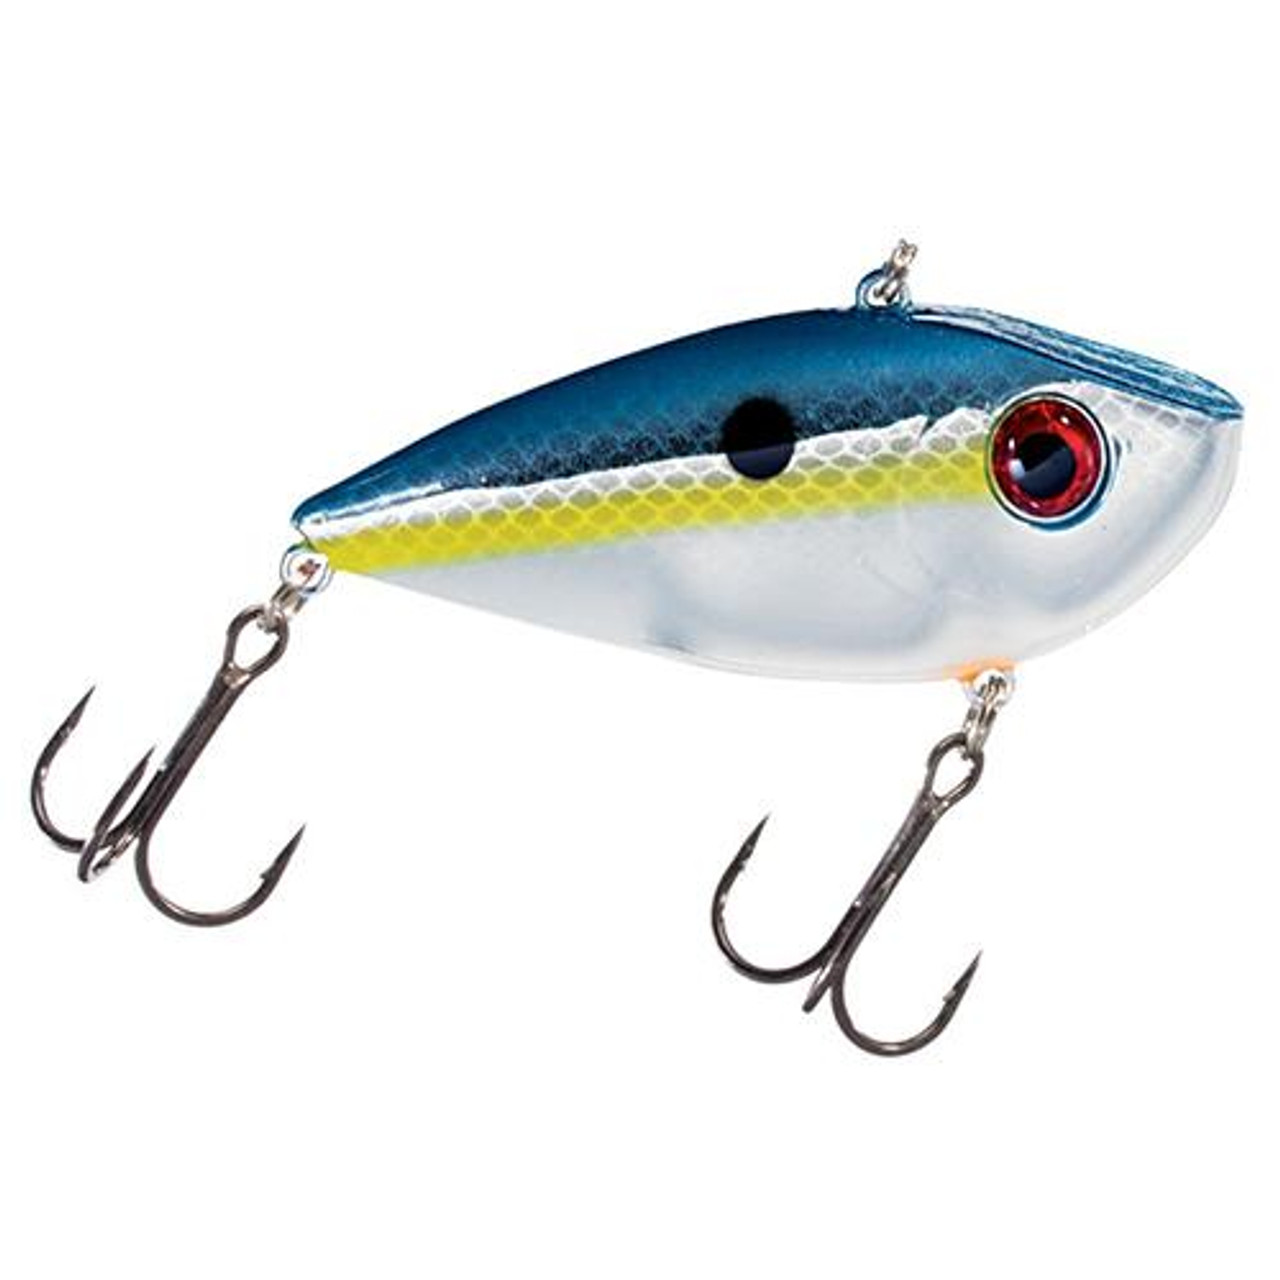 Strike King Lures Red Eyed Shad 1/4 oz Hard Lipless Crankbait Lure 2  Length. Variable Depth, Two Number 6 Treble Hooks, Chrome Sexy Shad, Per 1, REYESD14-514